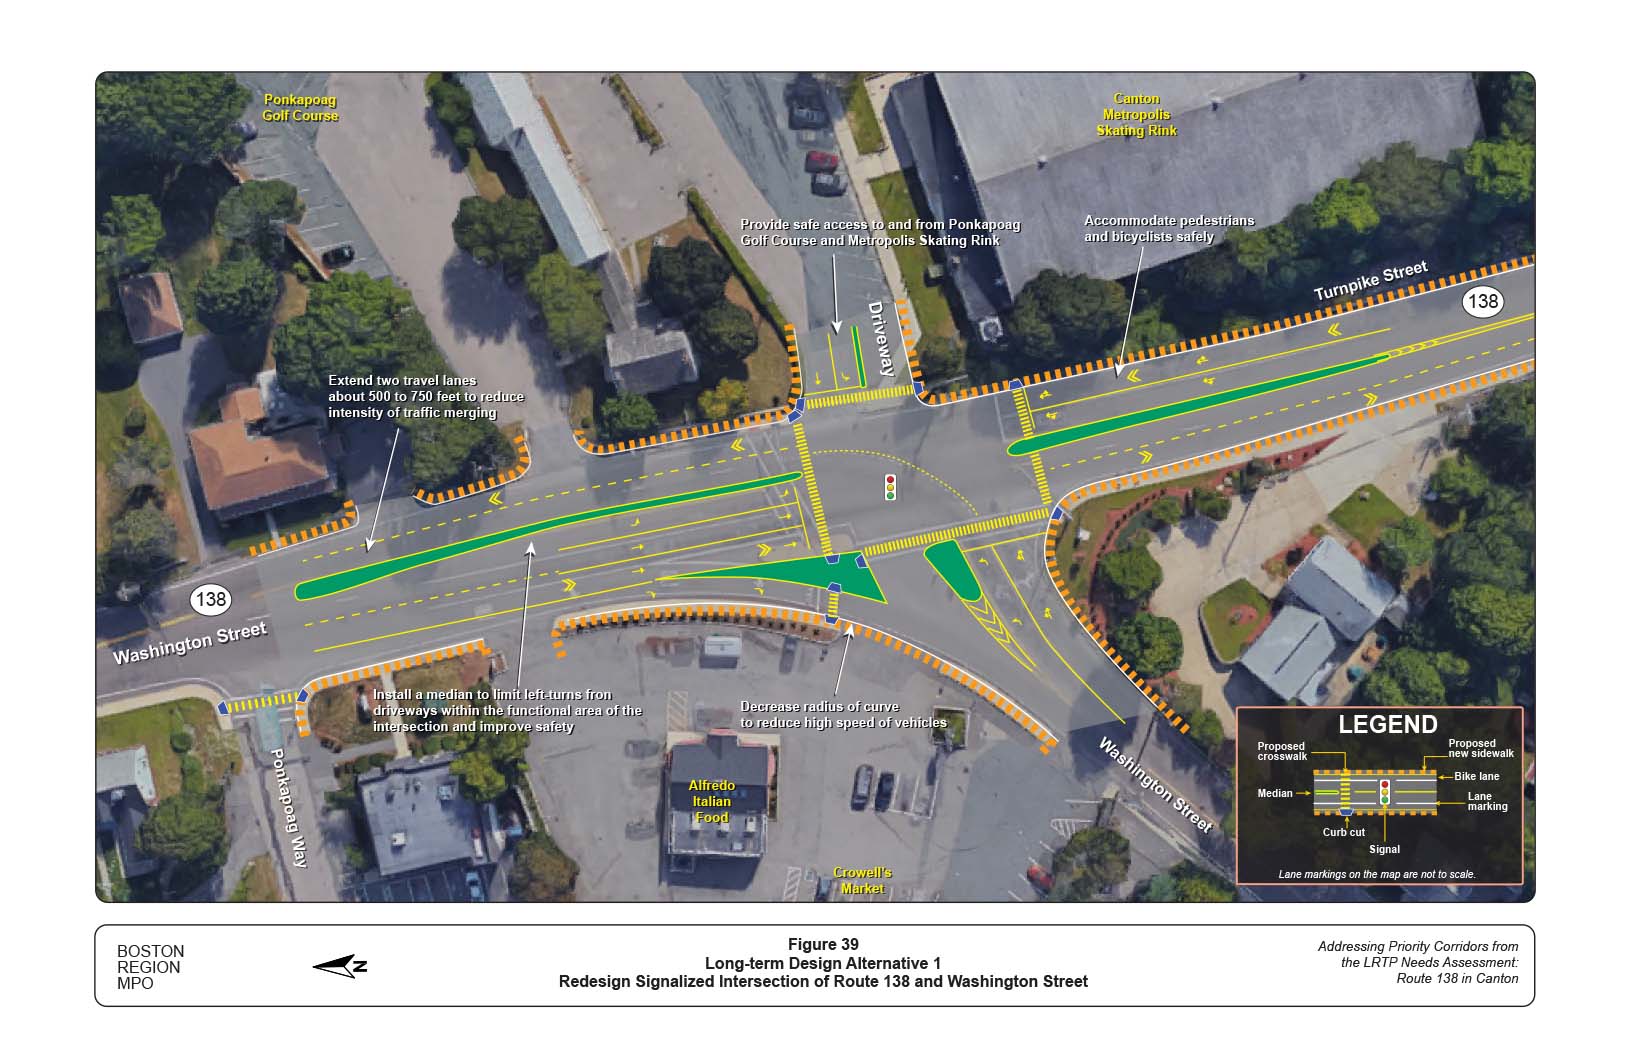 Figure 39 is map of the intersection of Route 138 and Washington Street with overlays showing a proposed redesign of the signalized intersection and other proposed improvements to the roadway.